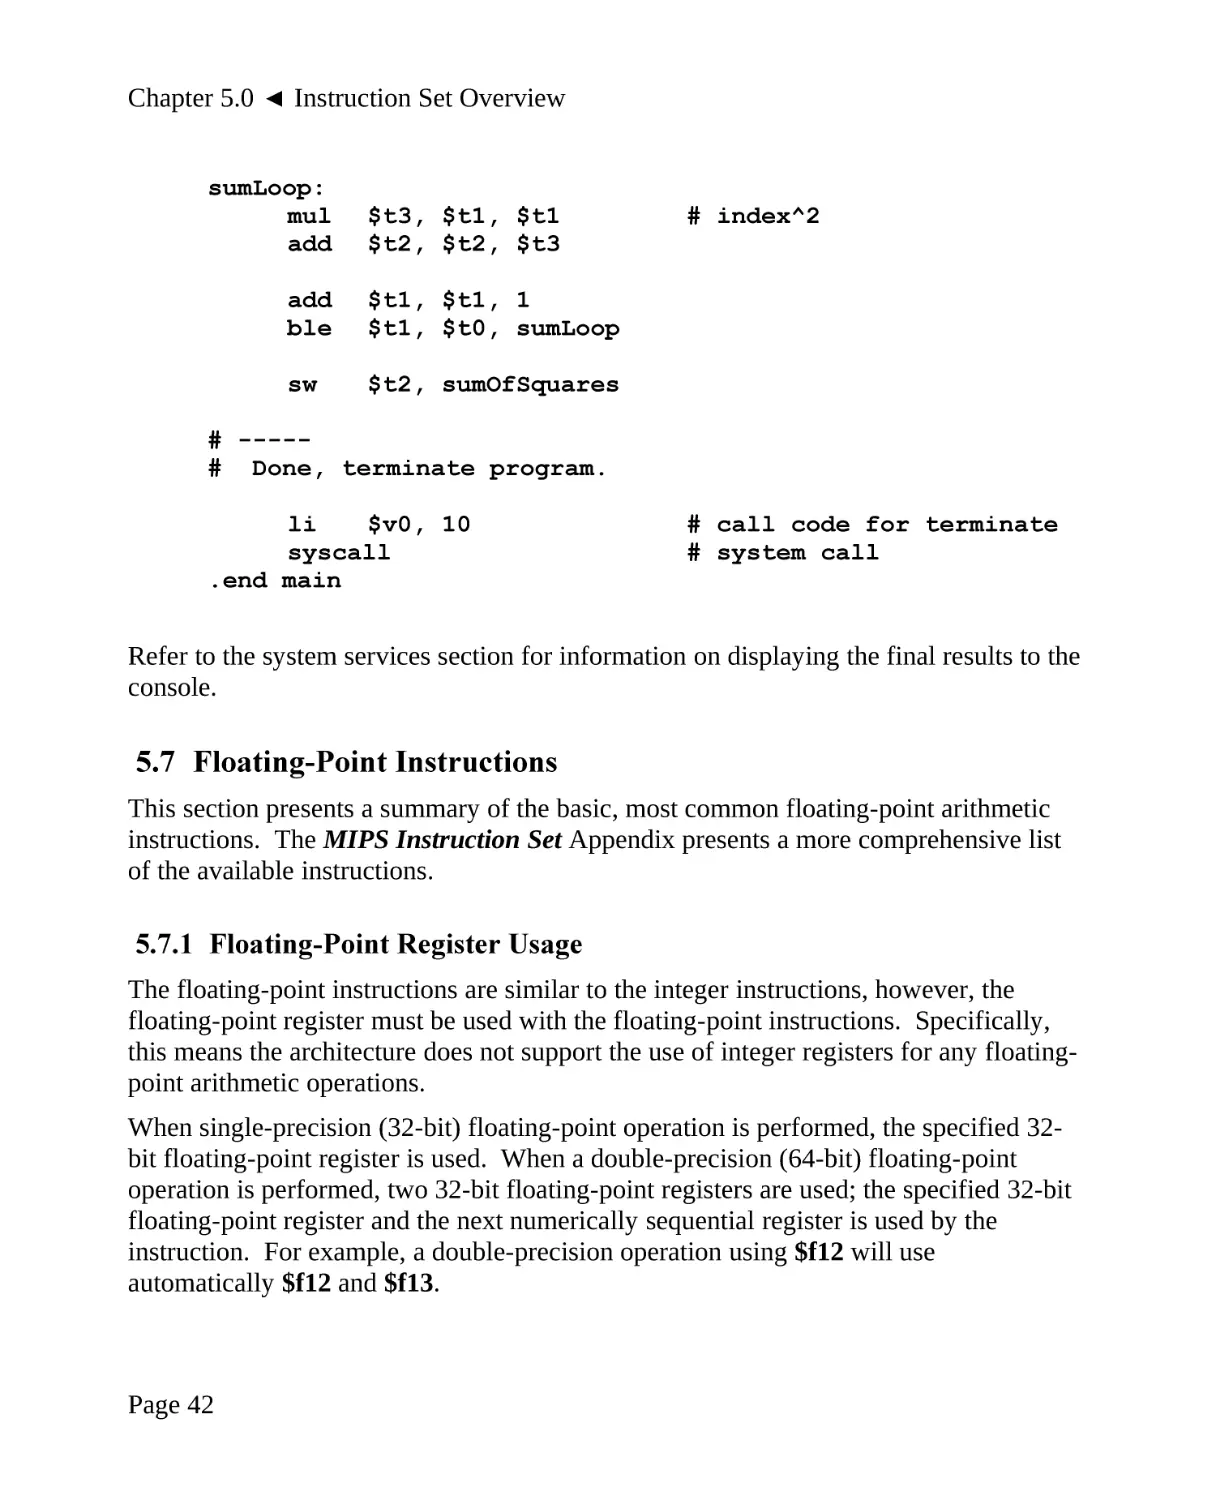 5.7 Floating-Point Instructions
5.7.1 Floating-Point Register Usage